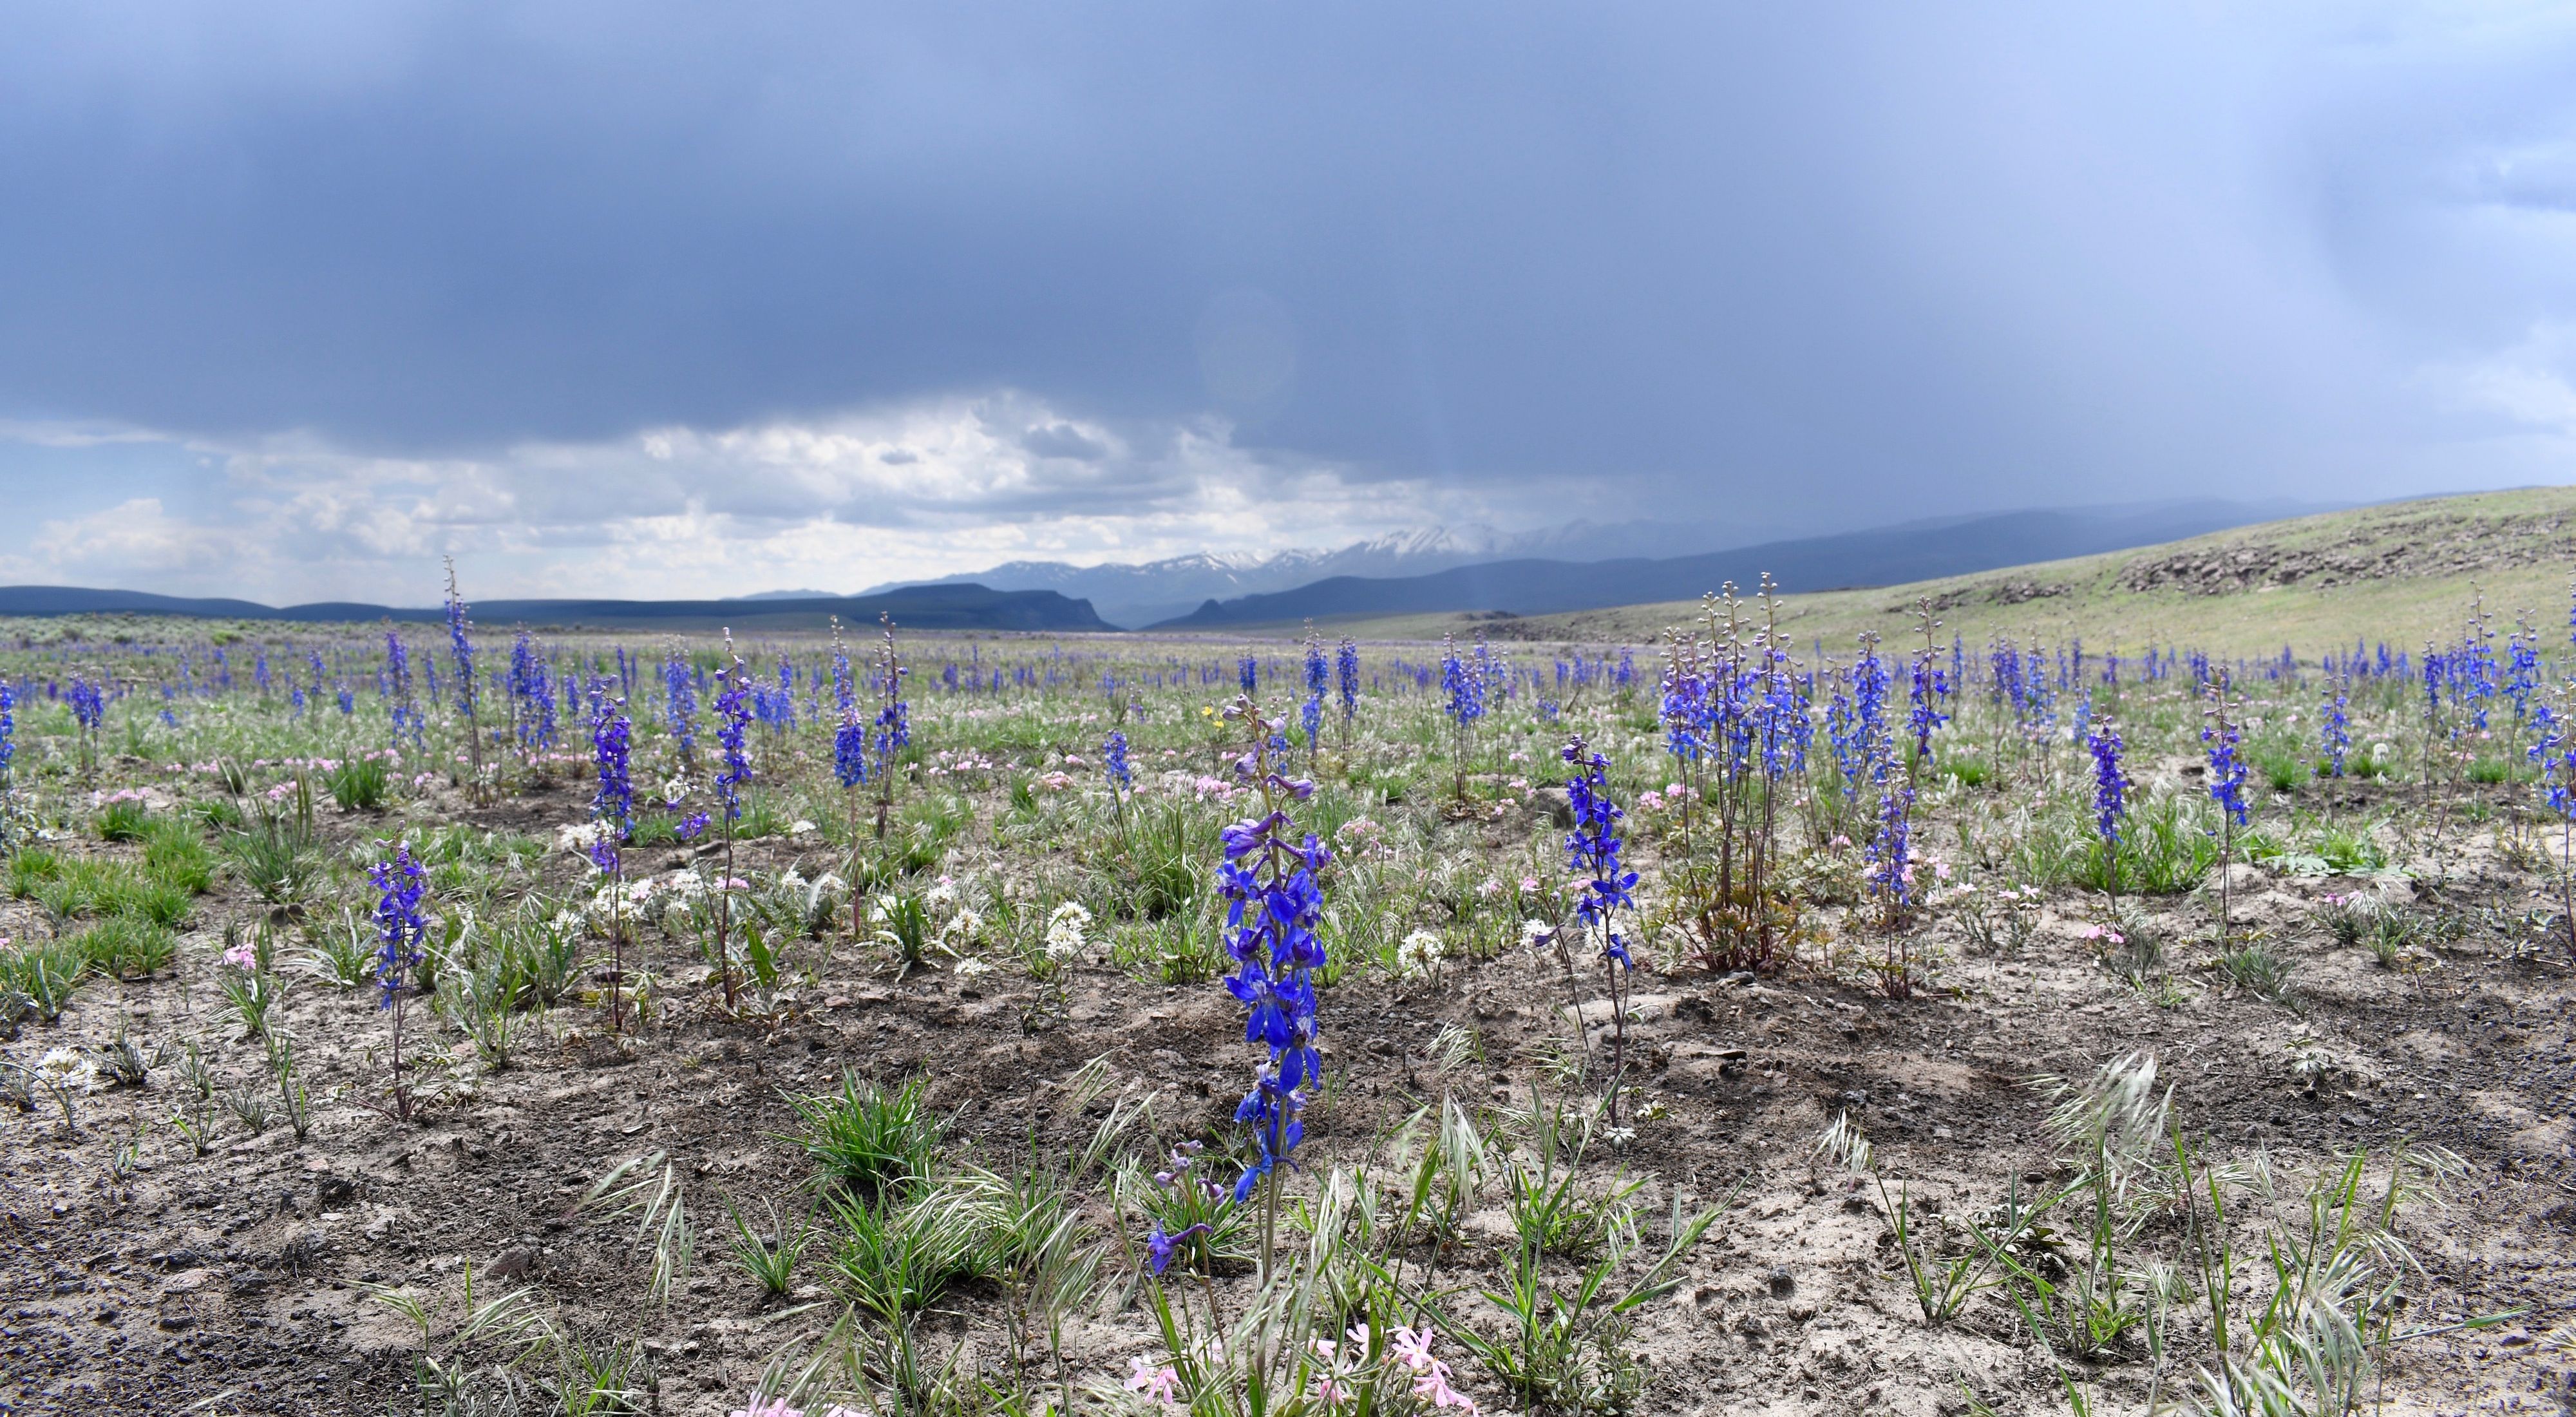 Sandy soil with abundant purple wildflowers growing on a gentle slope with mountains in the distance.